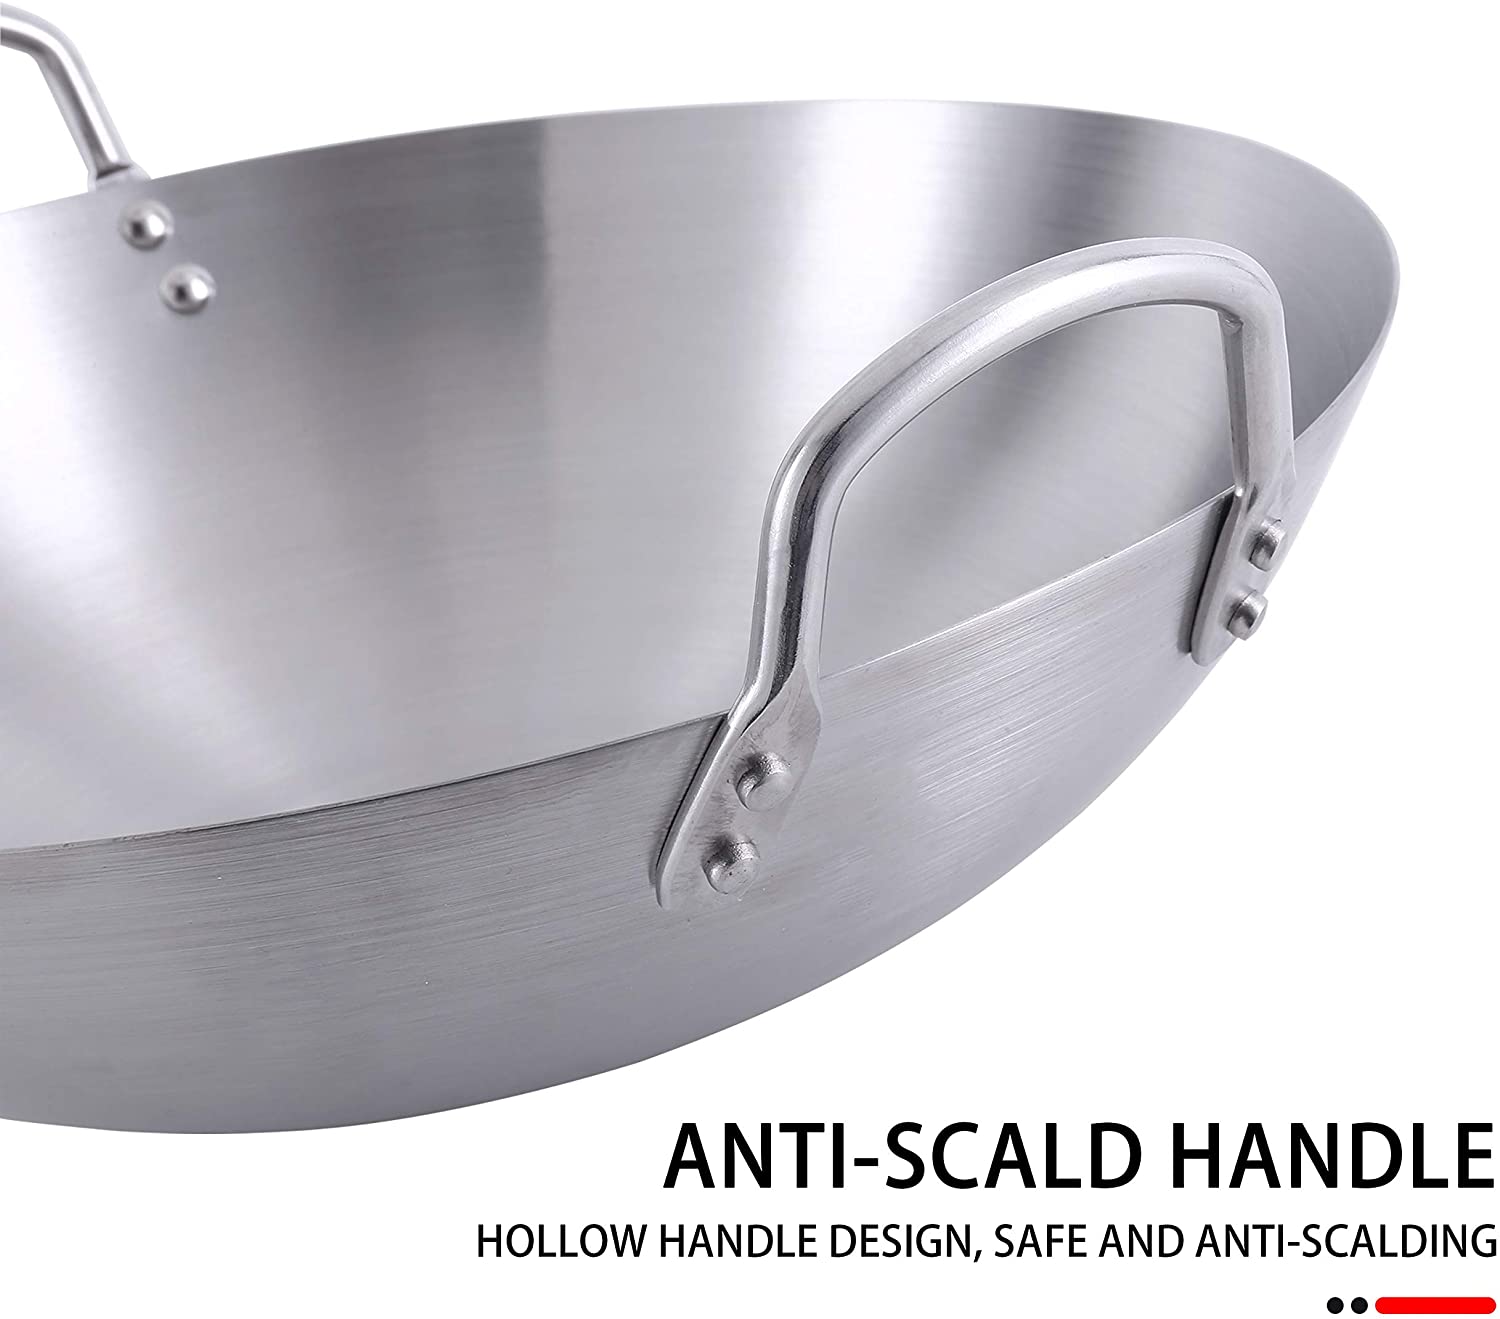 Stainless Steel Fry Pan with Short Handles